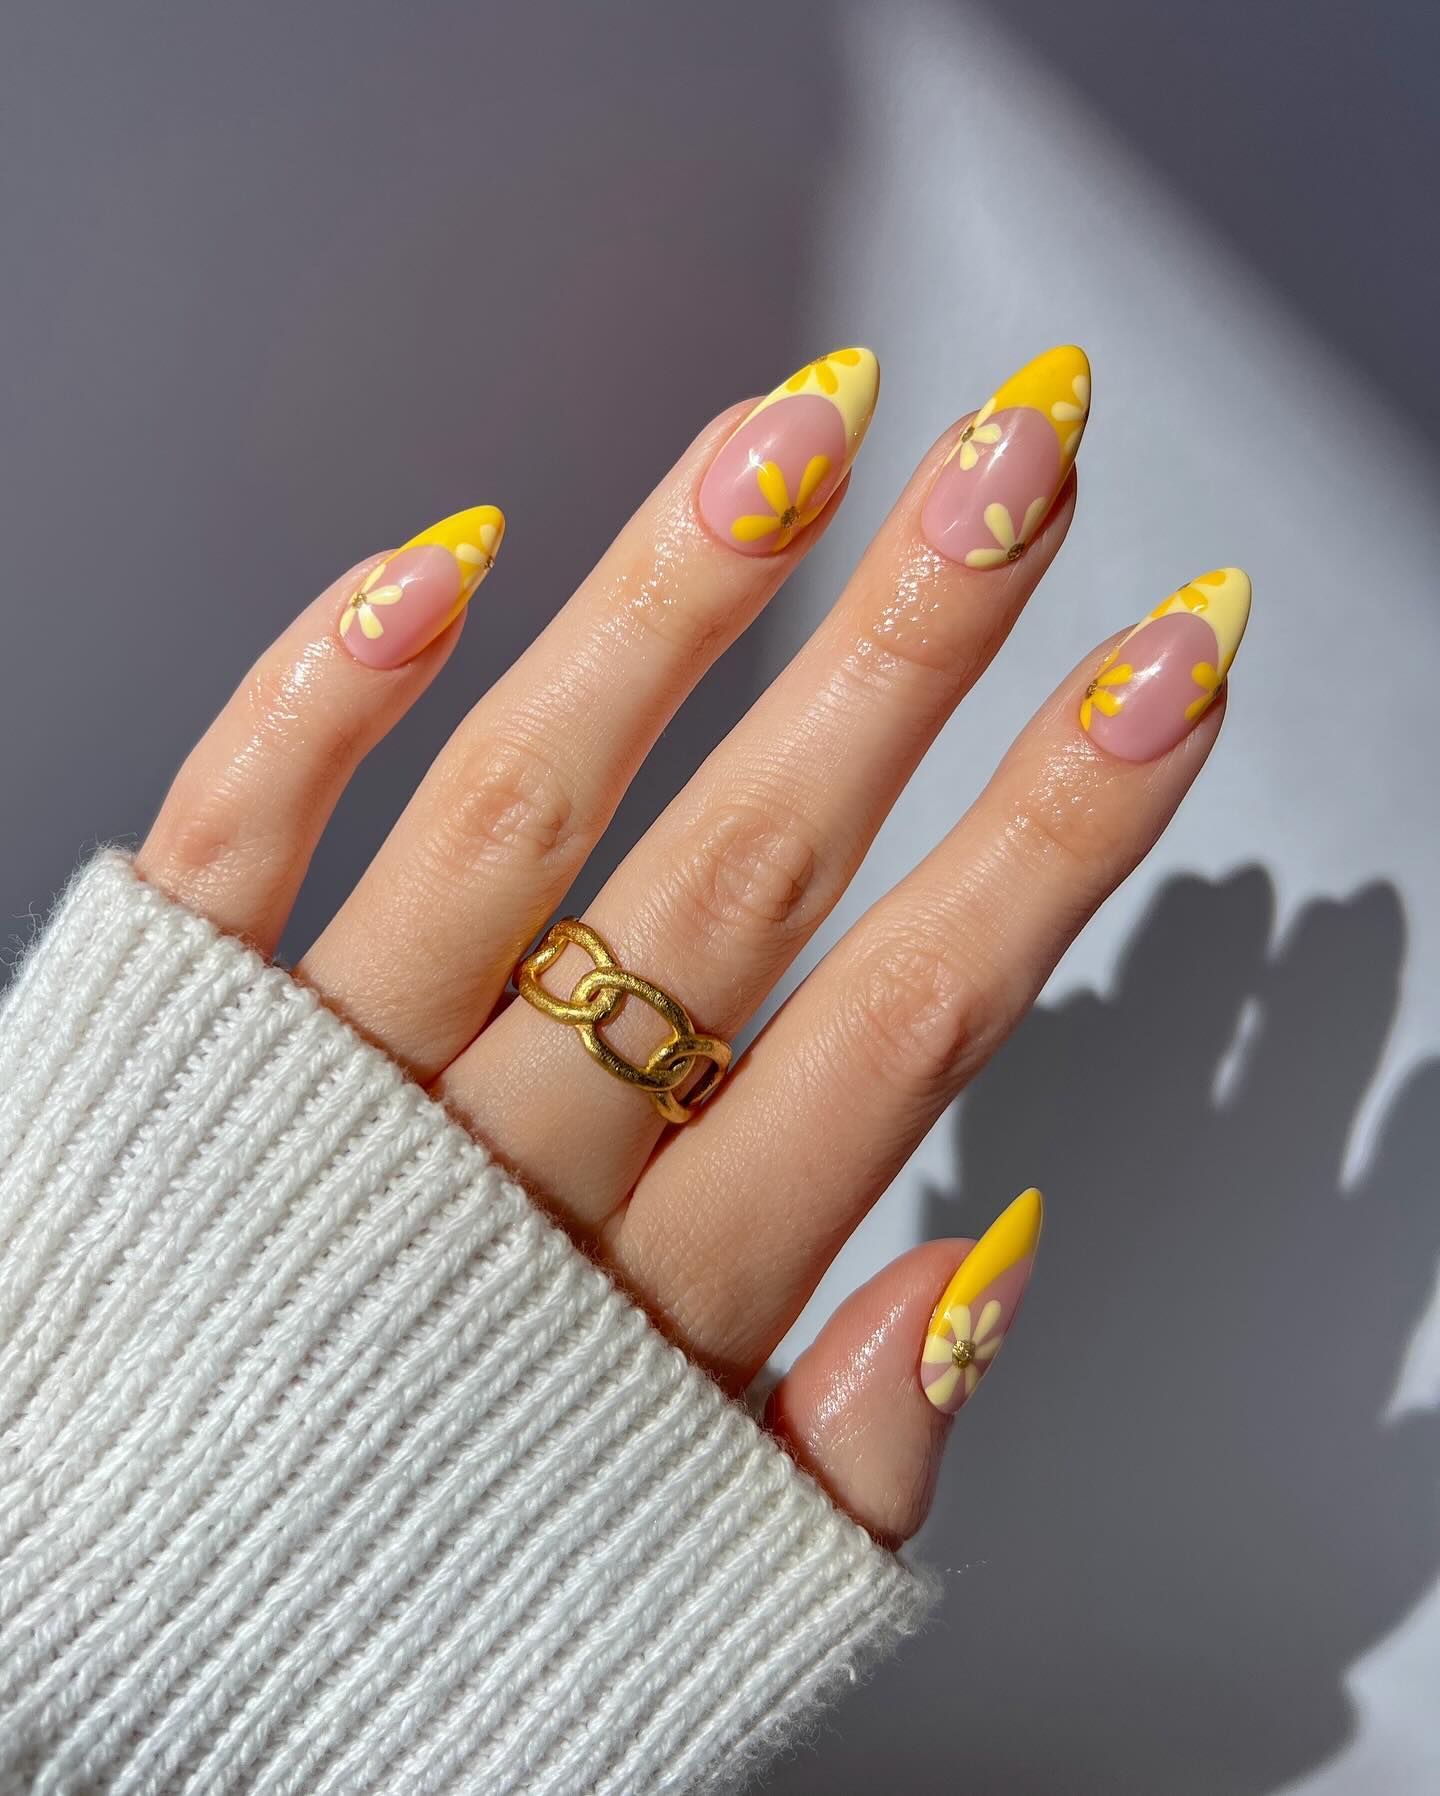 100+ Short Nail Designs You’ll Want To Try This Year images 100